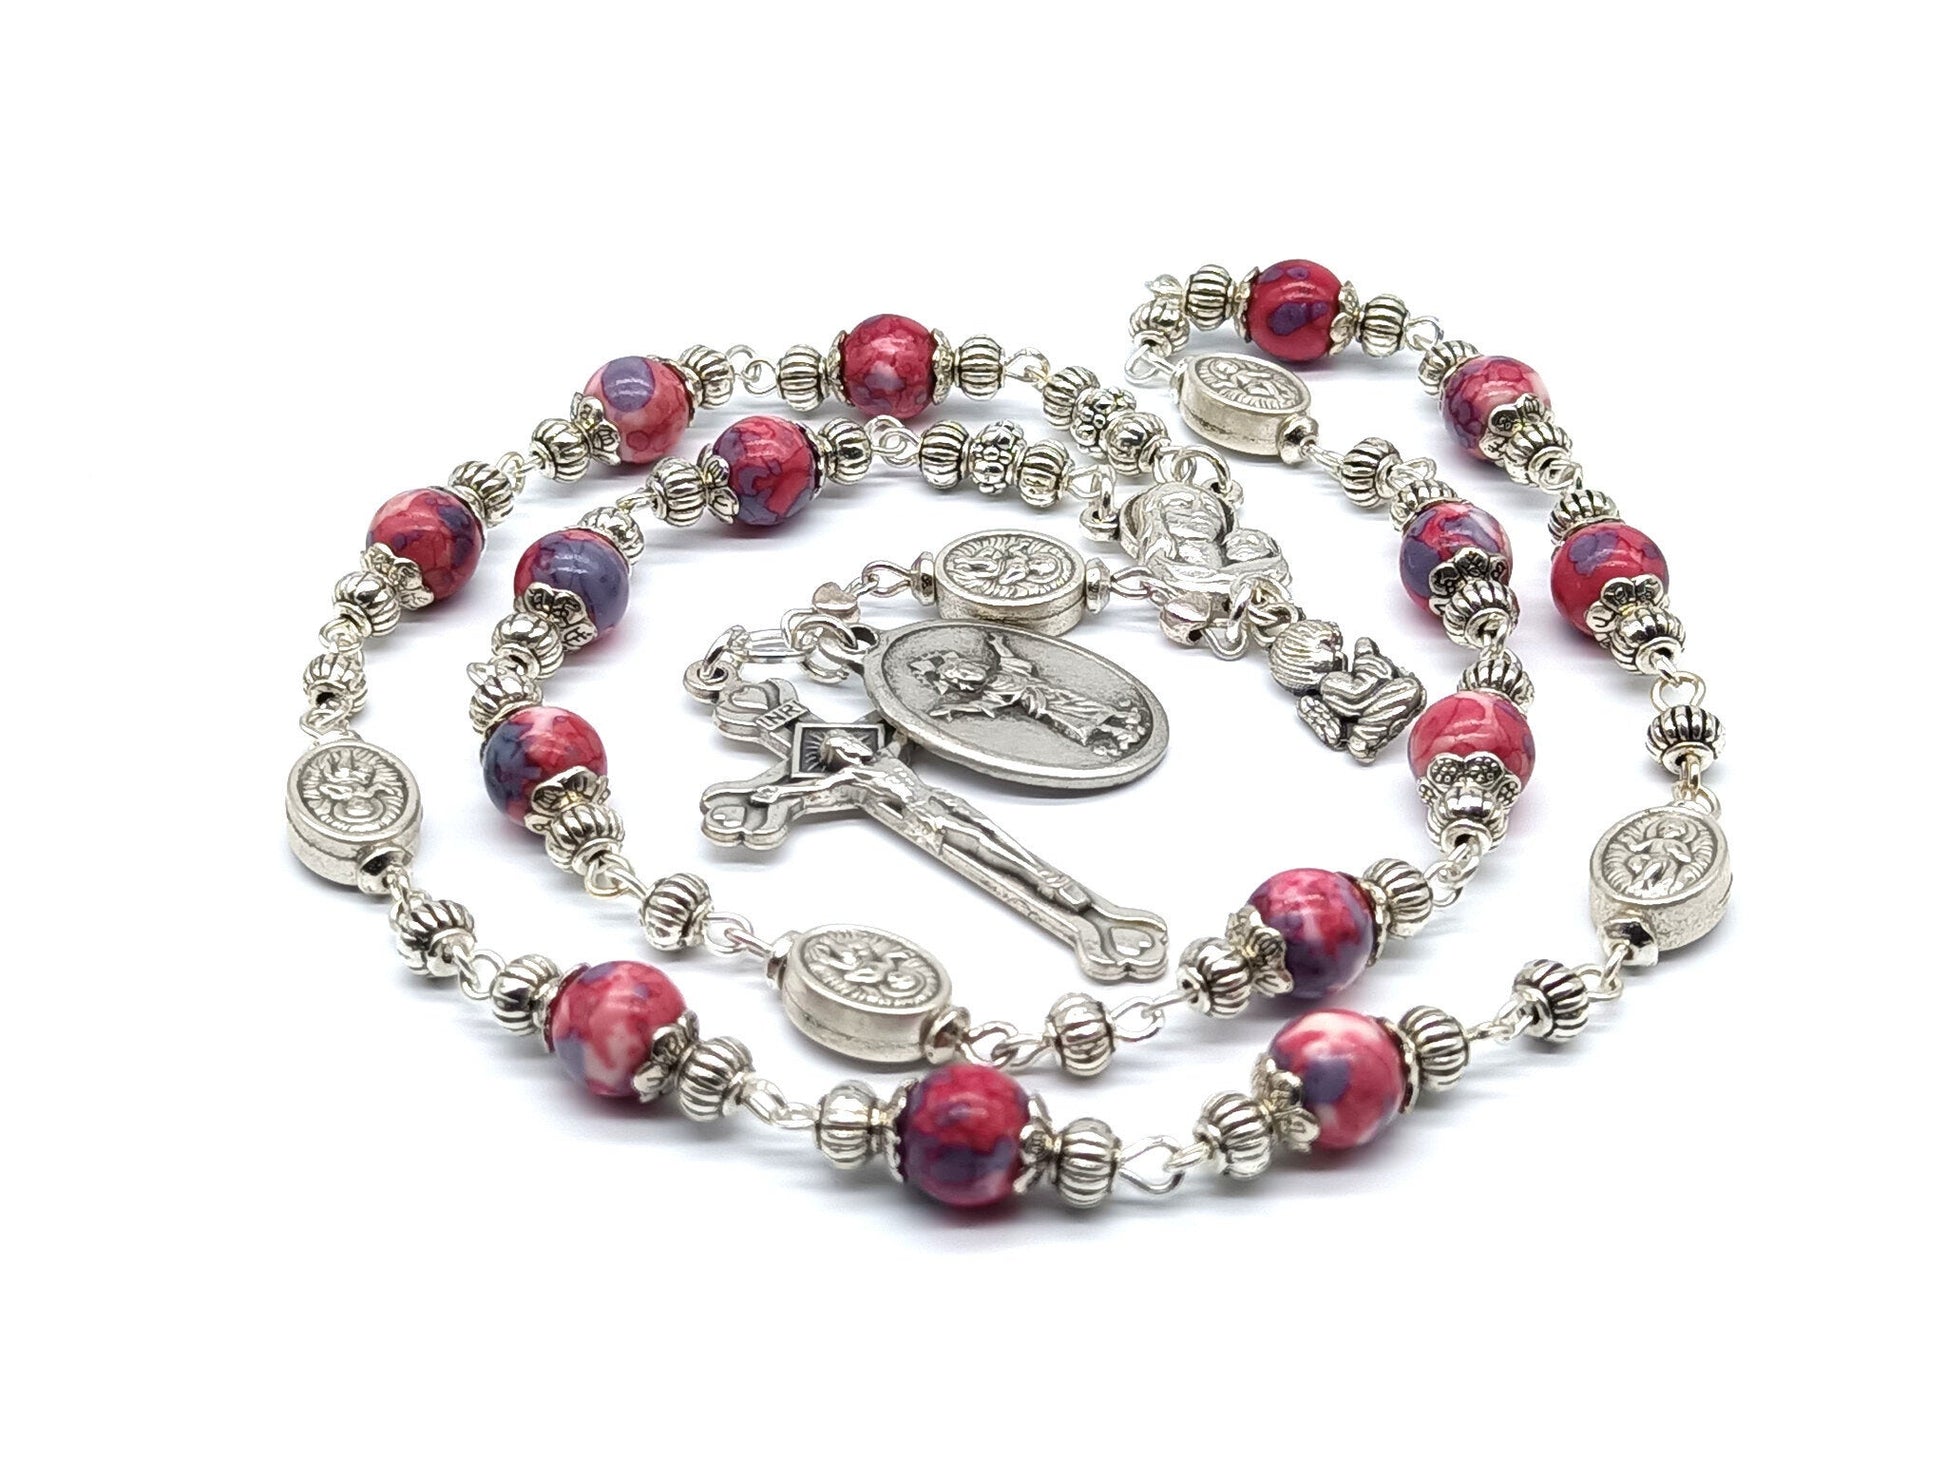 Gemstone Divino Nino unique rosary beads chaplet for the unborn with silver guardian angel medals.